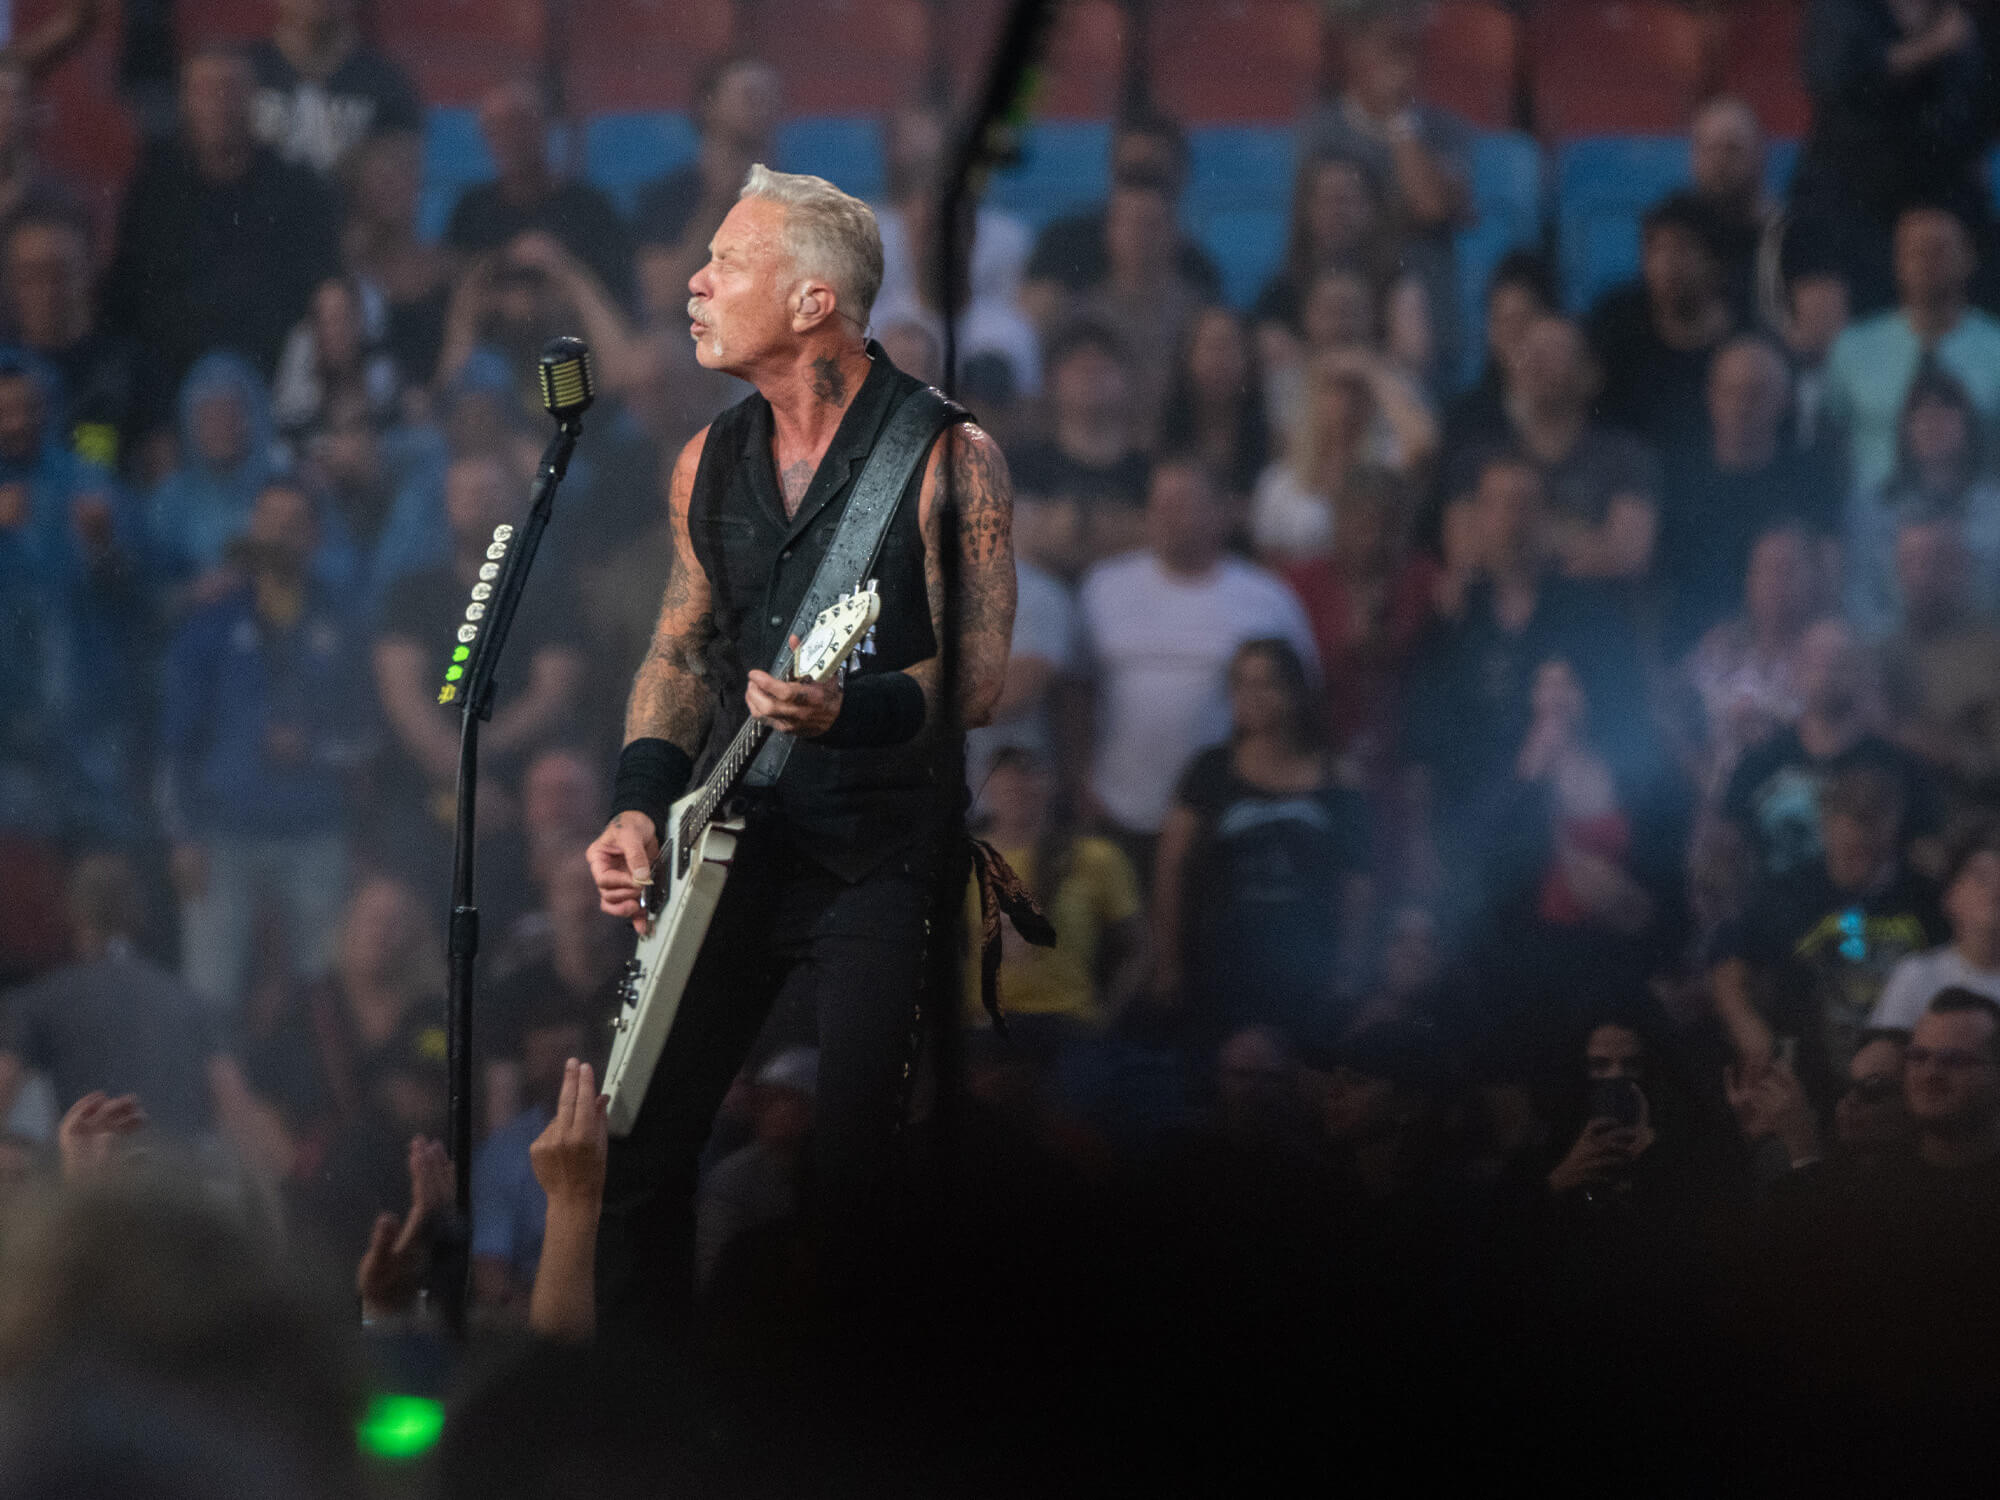 James Hetfield of Metallica playing his Gibson Flying V with a blurred crowd behind him